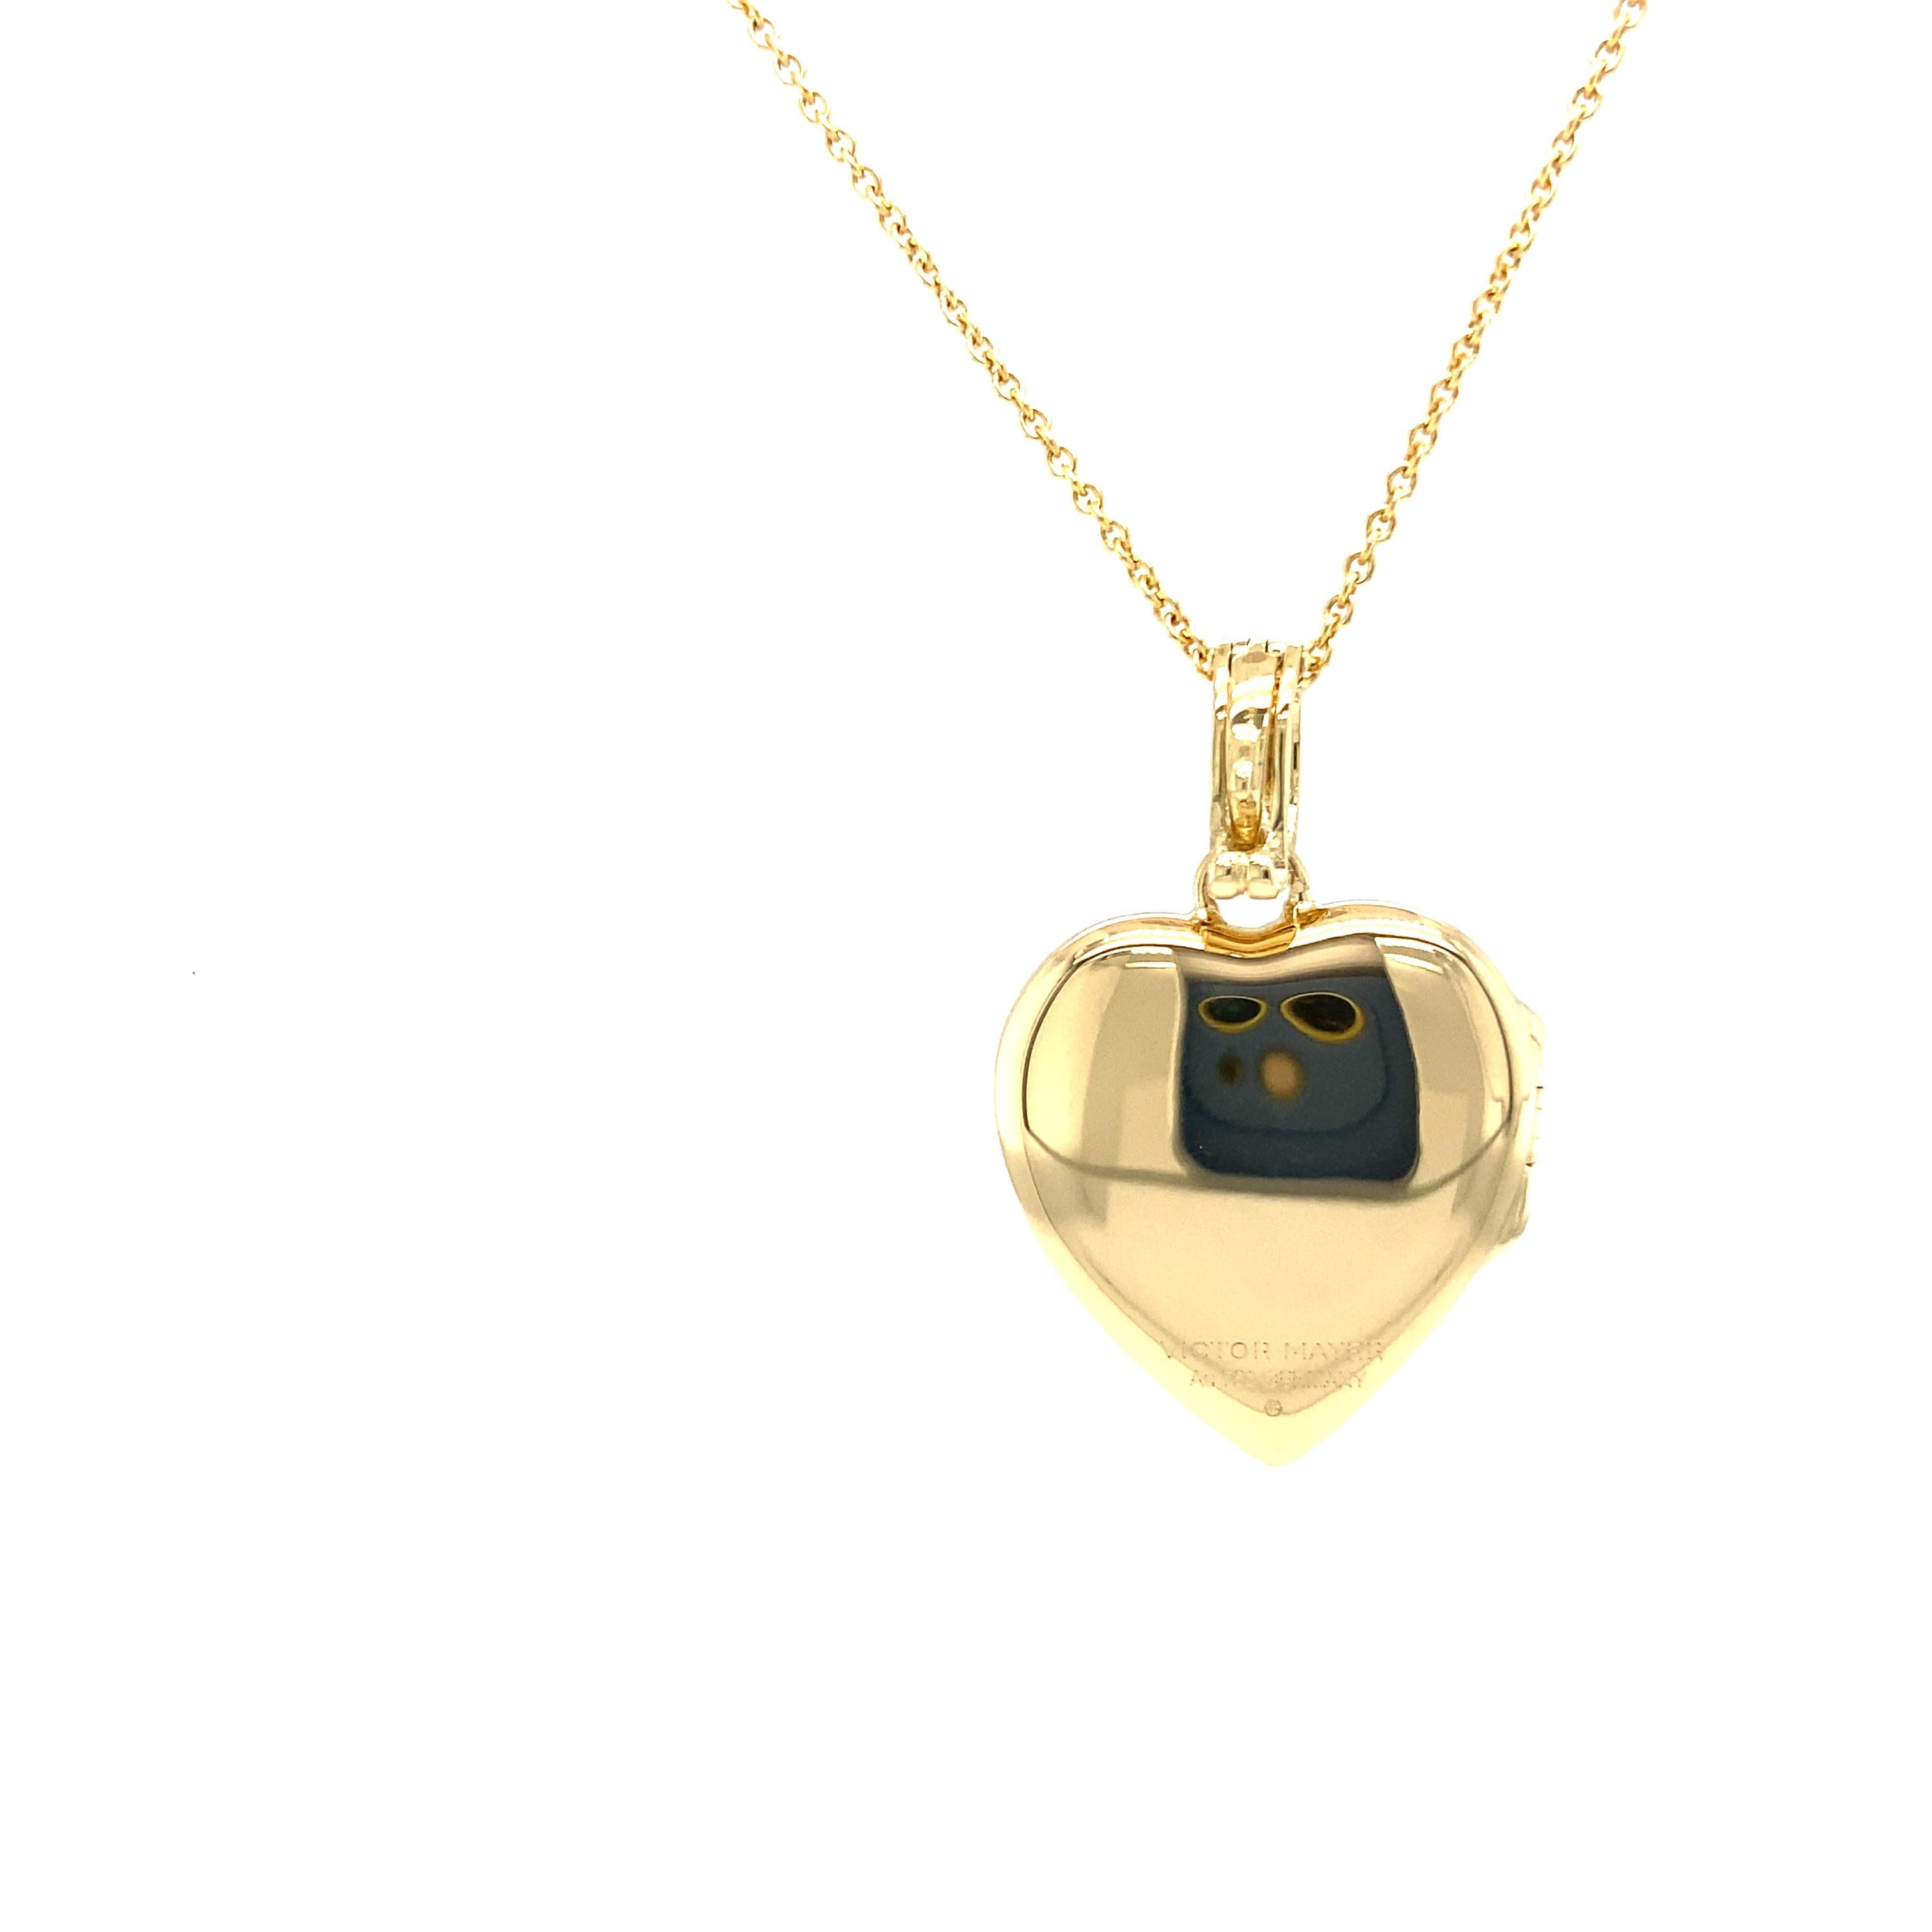 Women's Heart Locket Pendant Necklace - 18k Yellow Gold - robust design - 23 x 25 mm For Sale